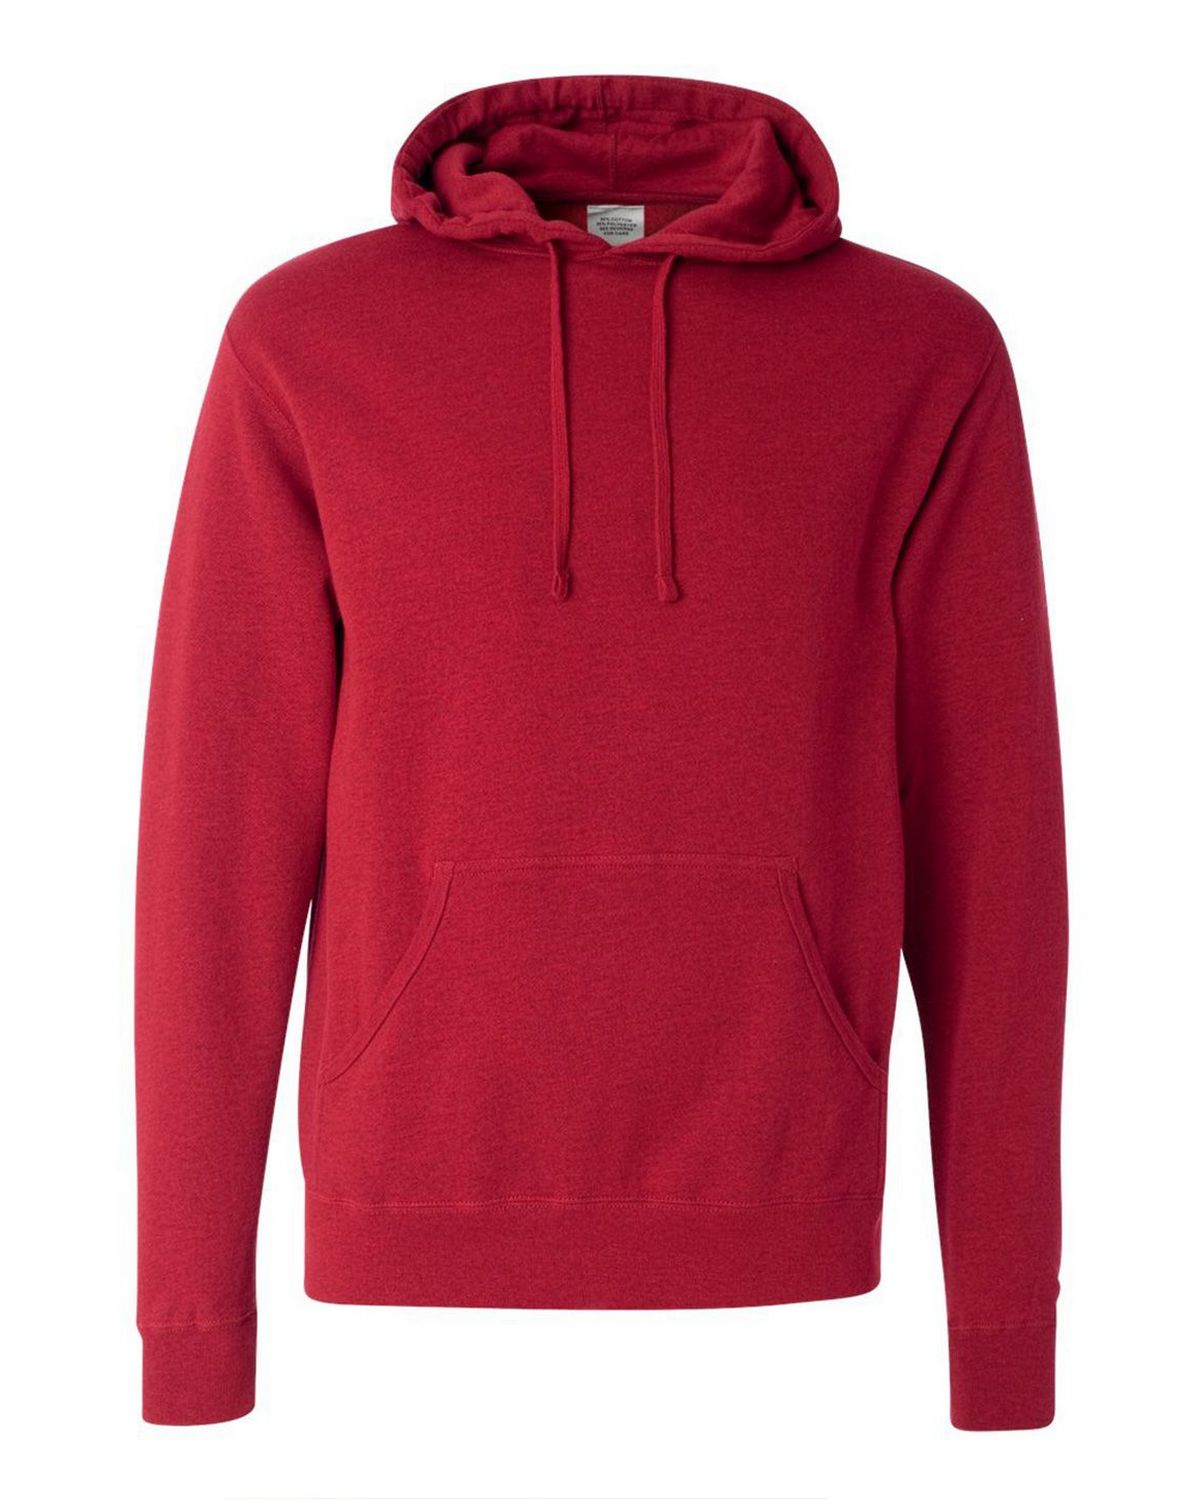 Independent Trading Co. AFX4000 Mens Hooded Pullover Sweatshirt